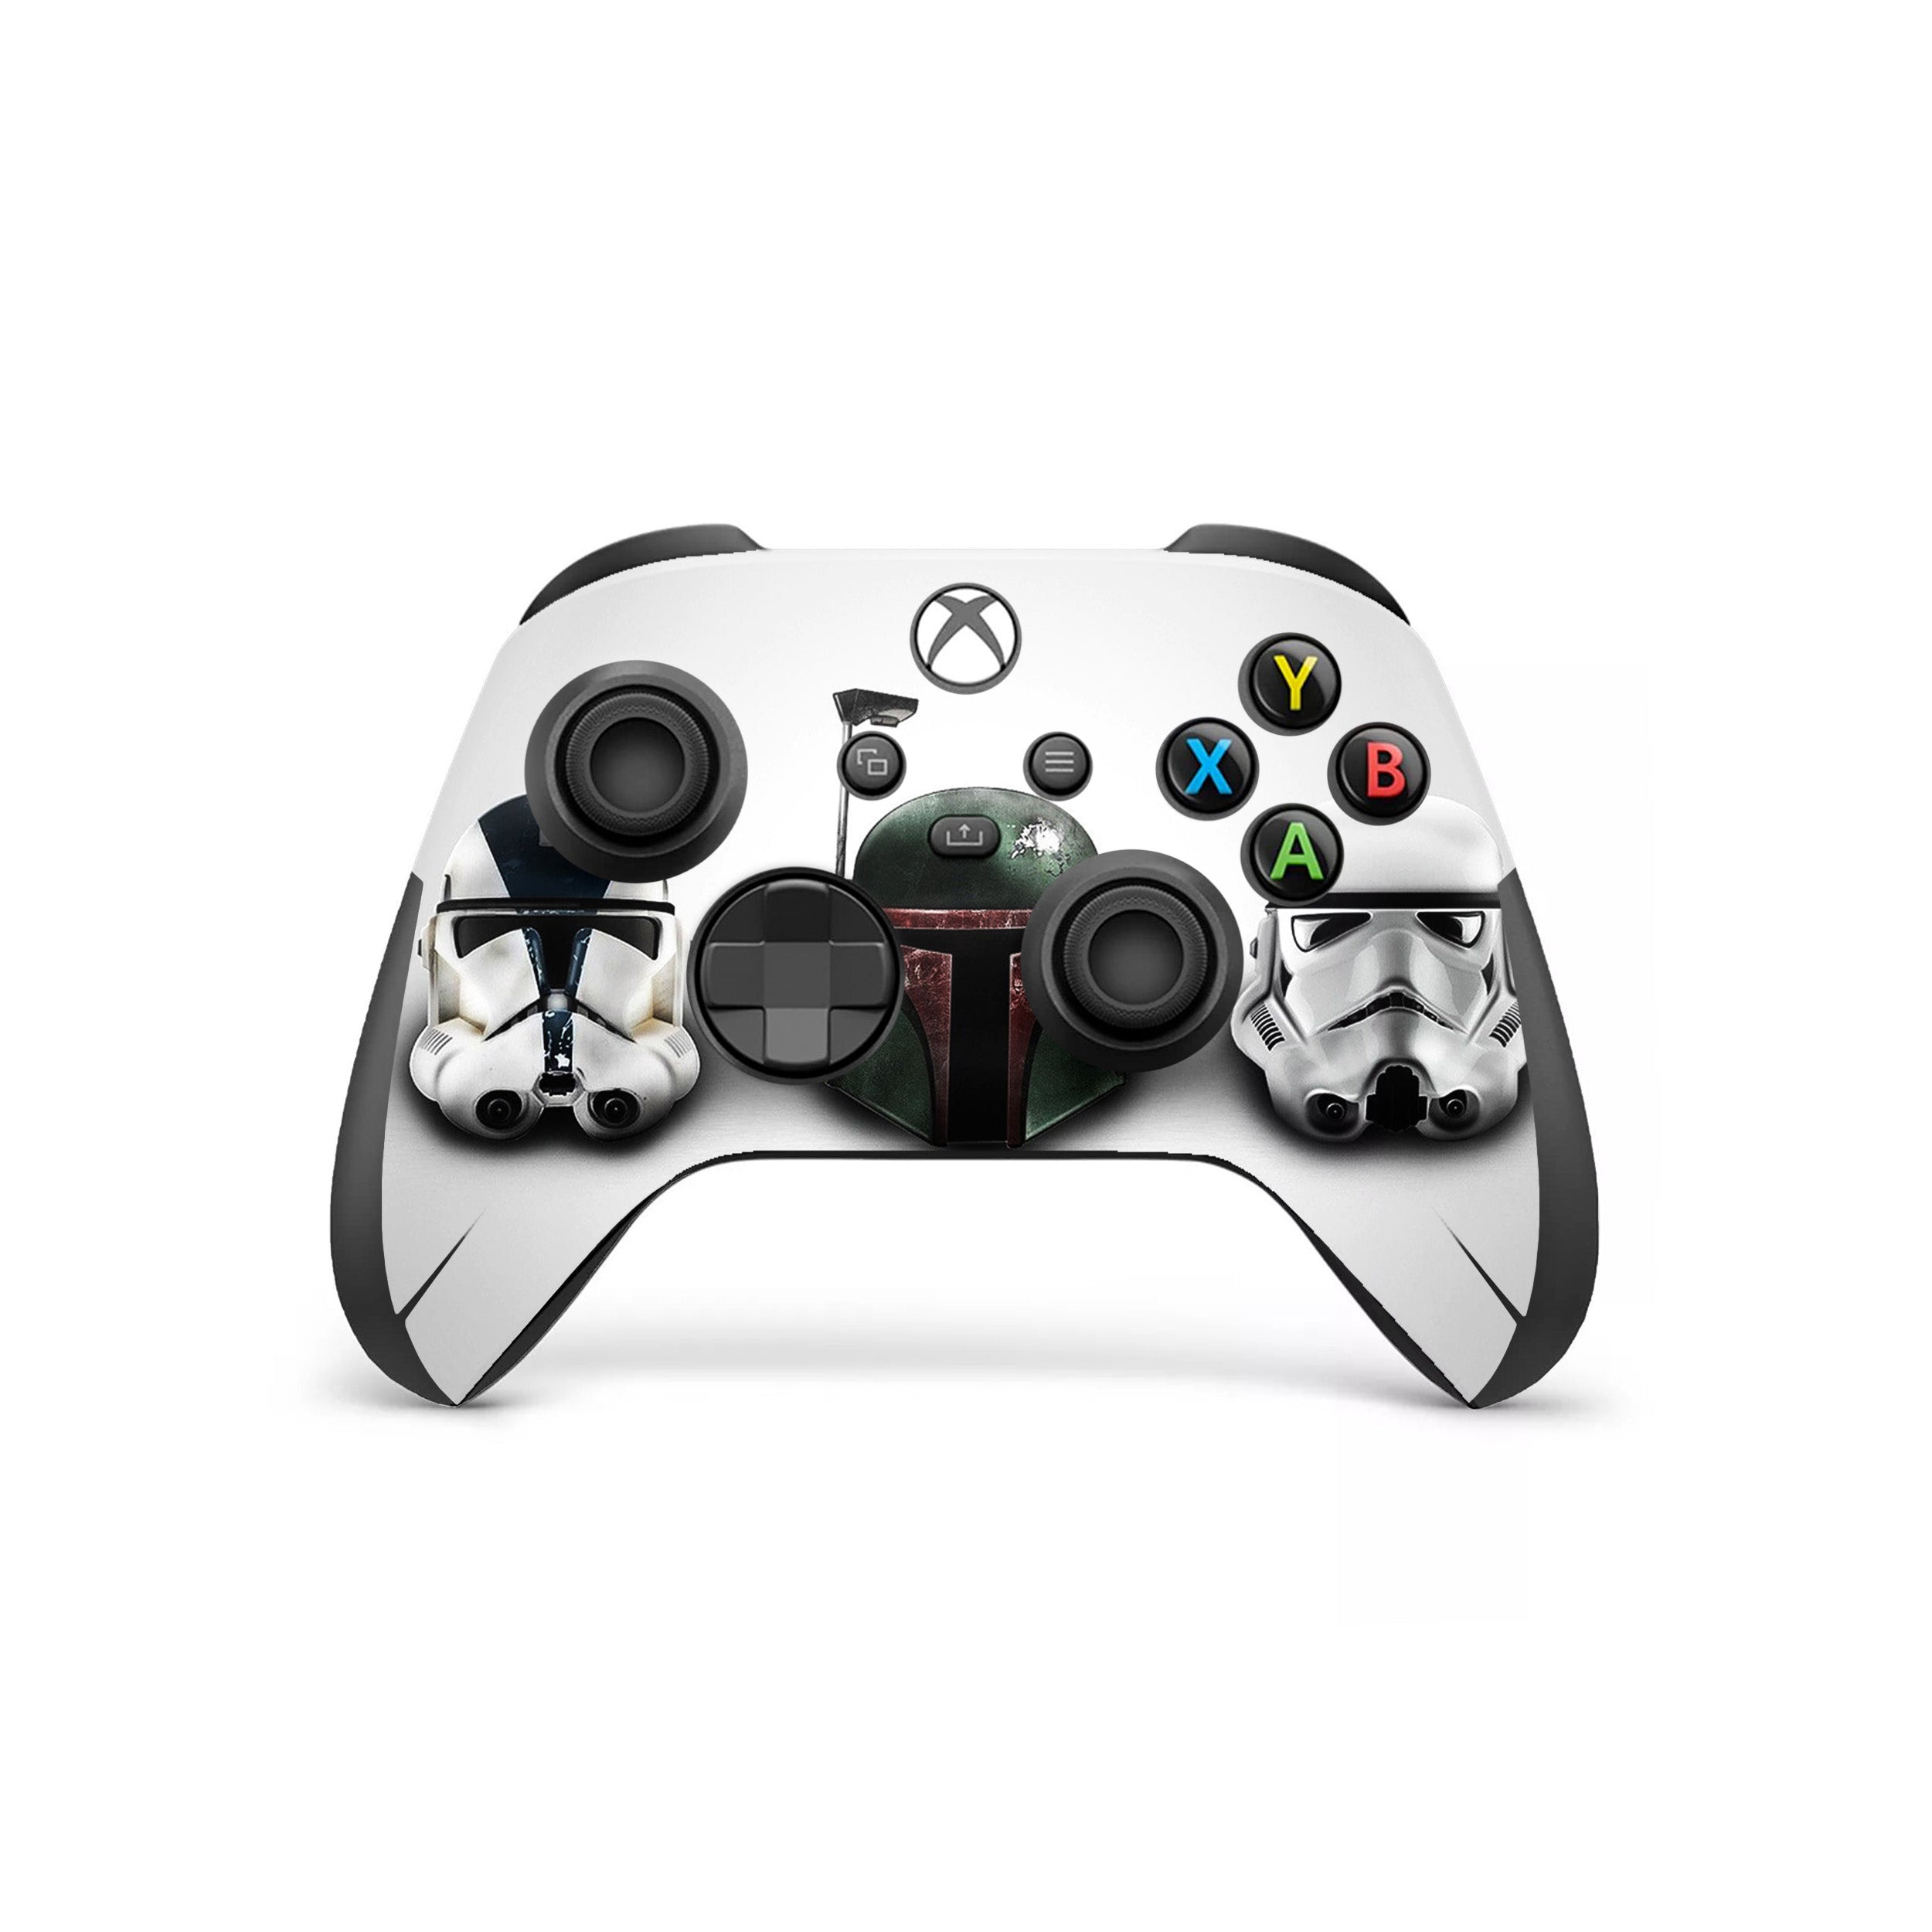 A video game skin featuring a Star Wars design for the Xbox Wireless Controller.